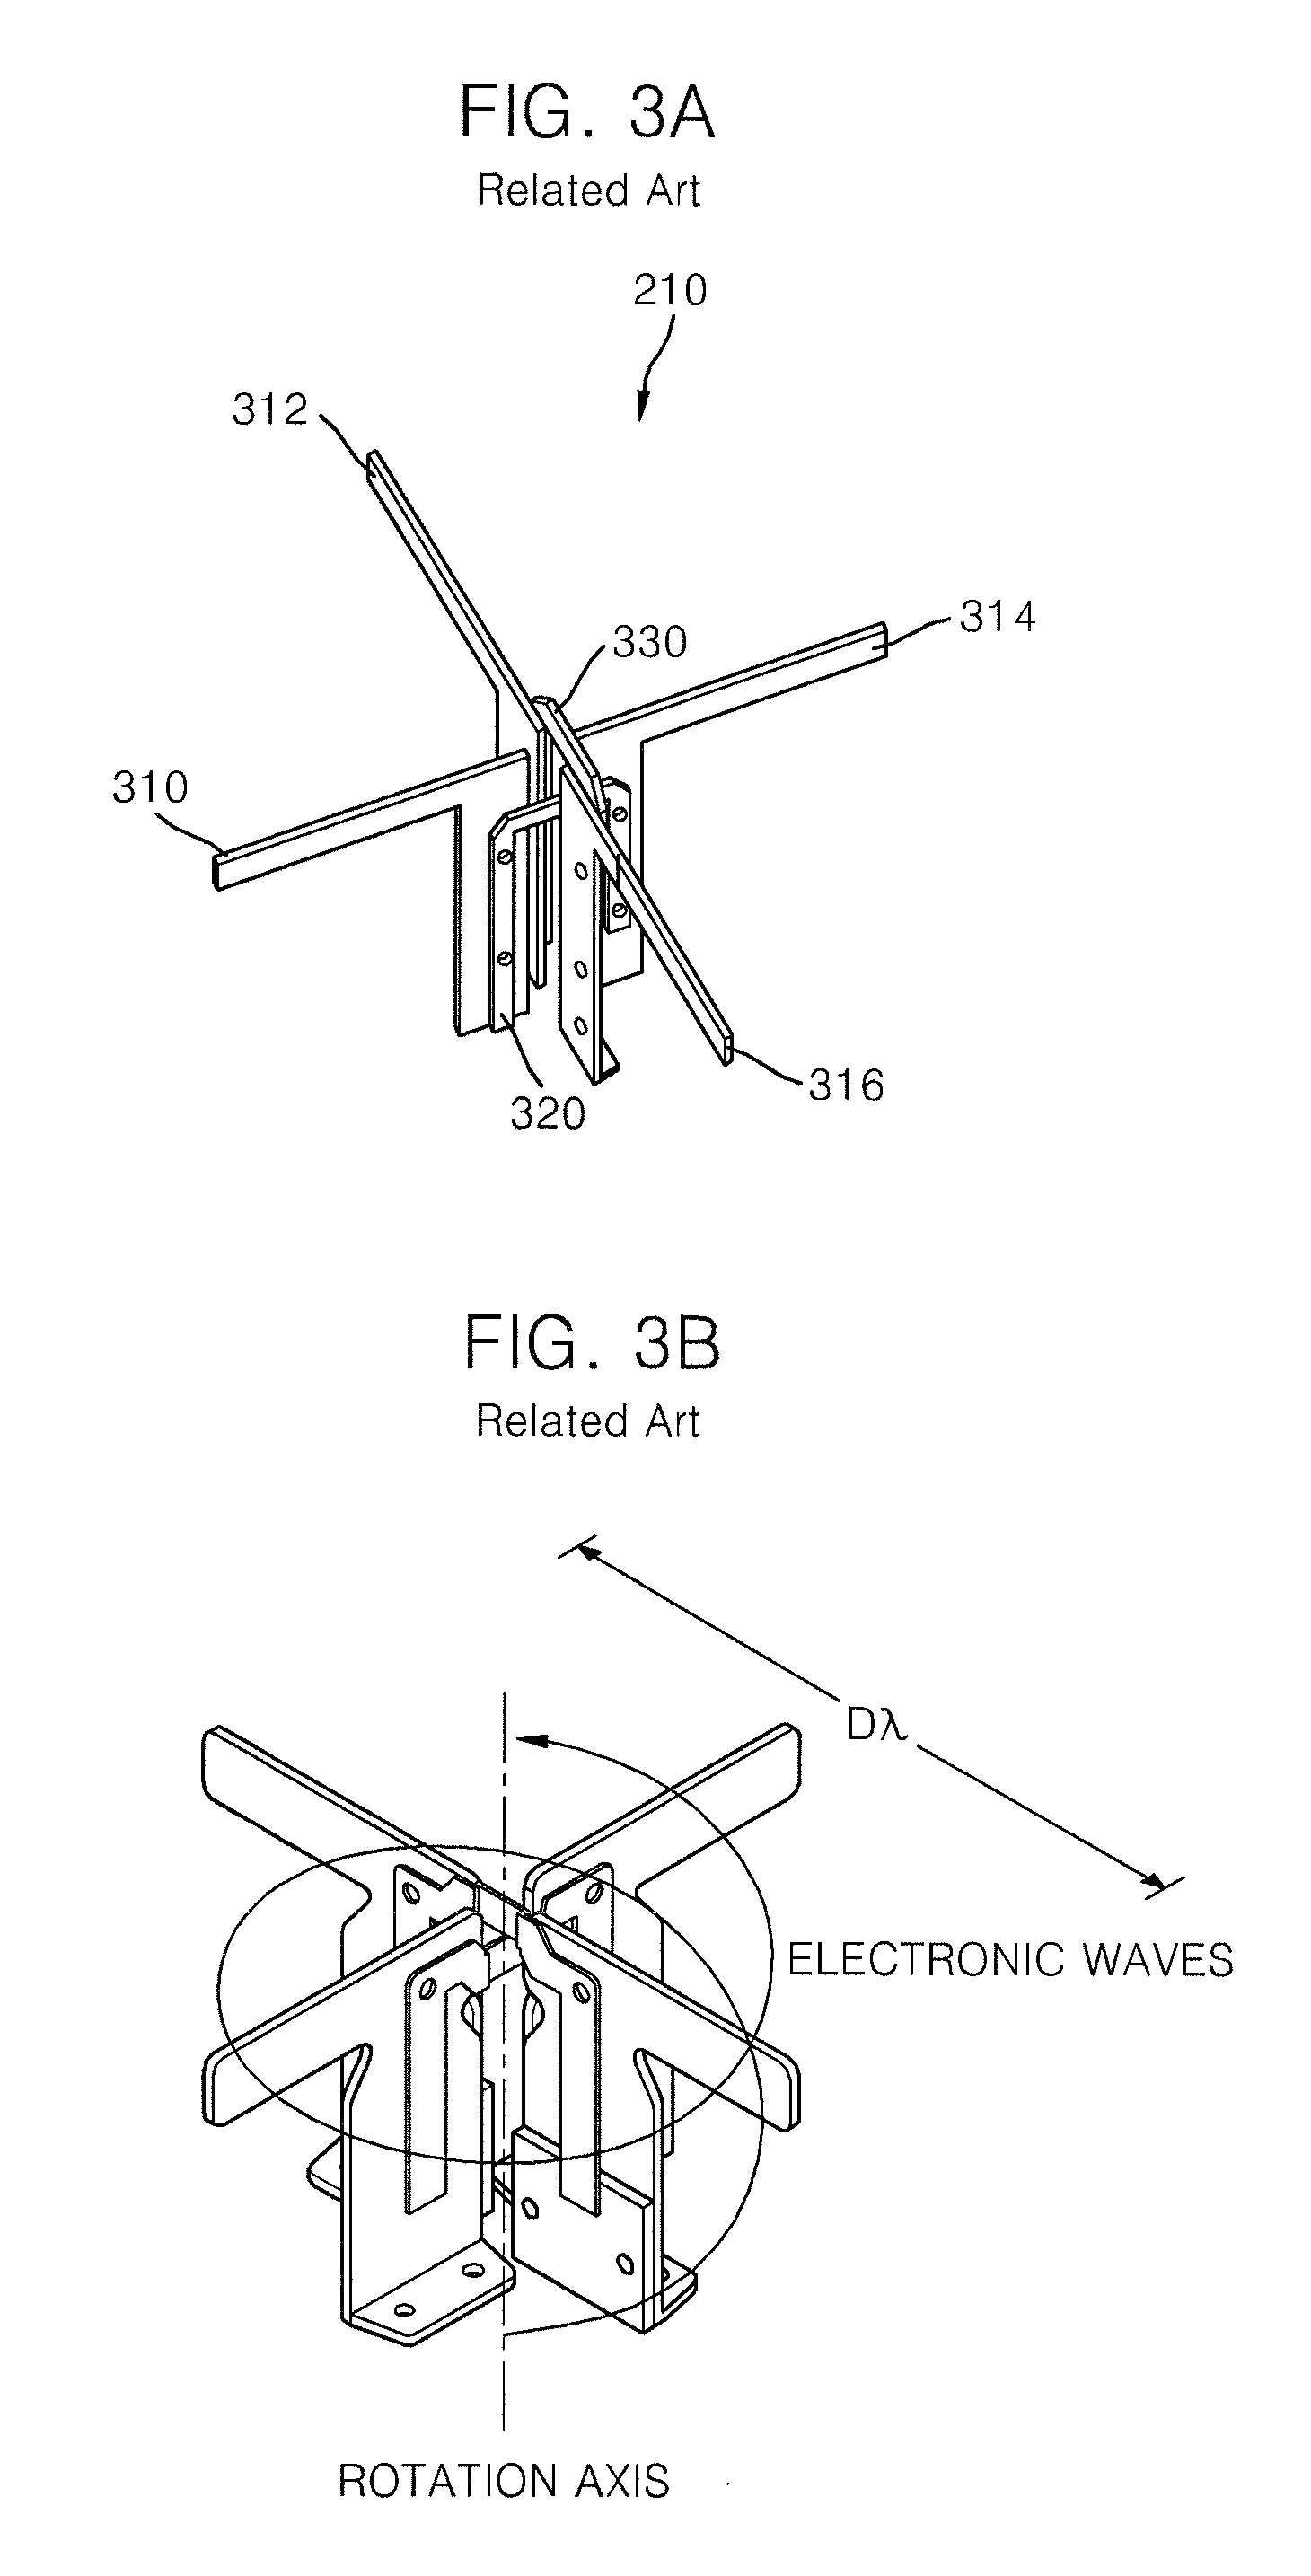 Complex elements for antenna of radio frequency repeater and dipole array circular polarization antenna using the same